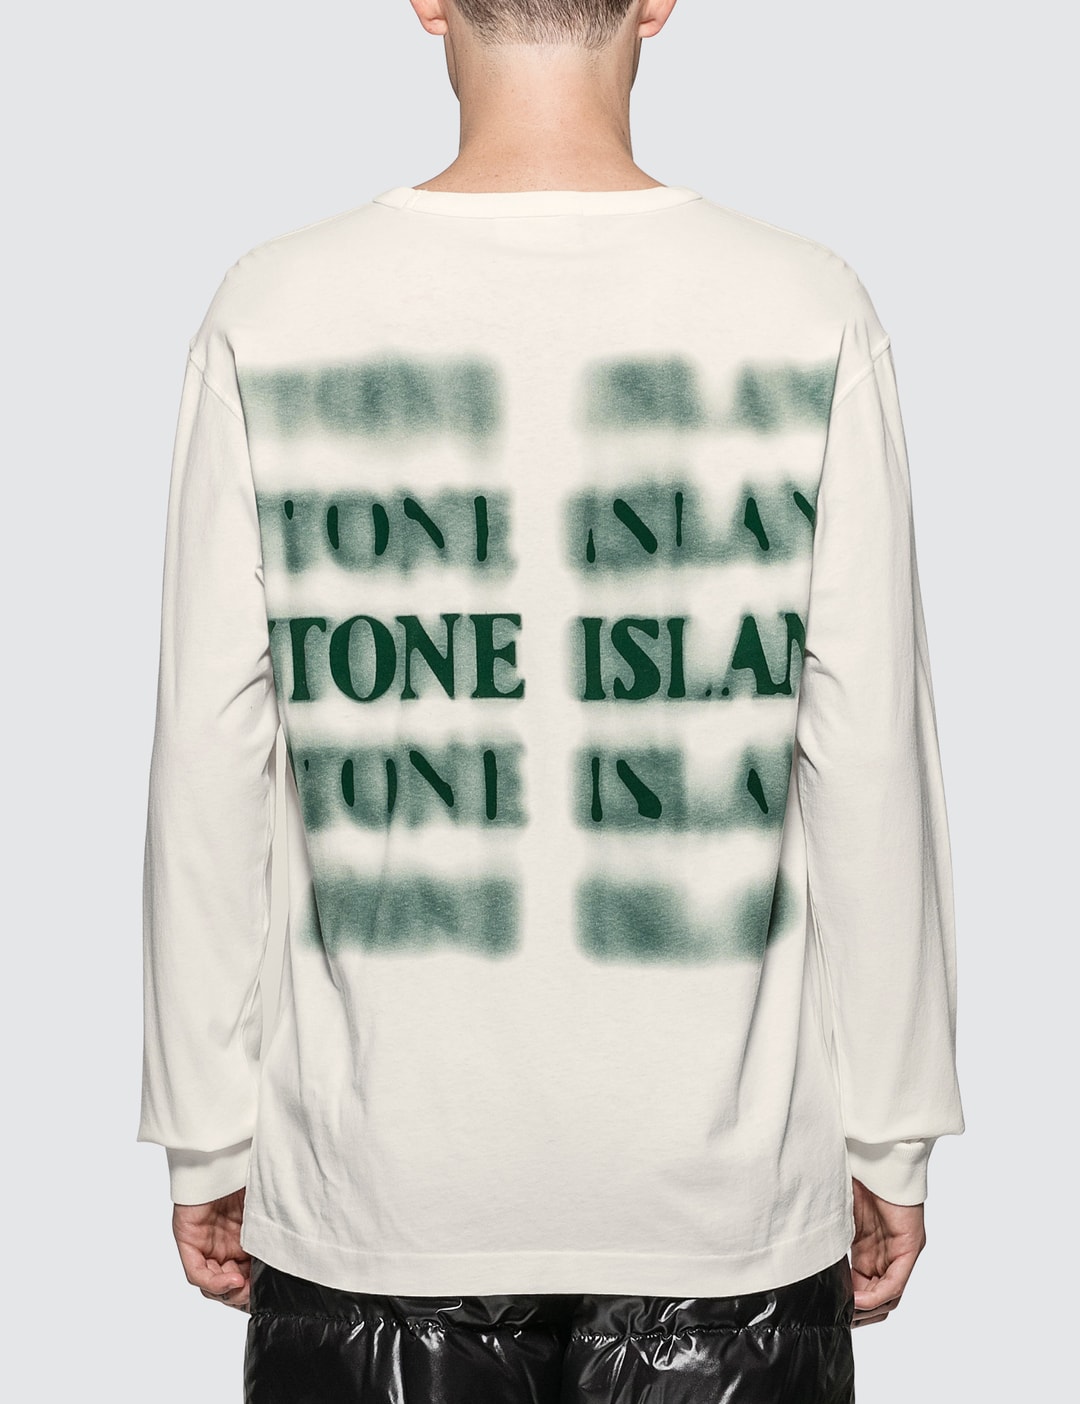 Graphic Five Long Sleeve T-Shirt Placeholder Image